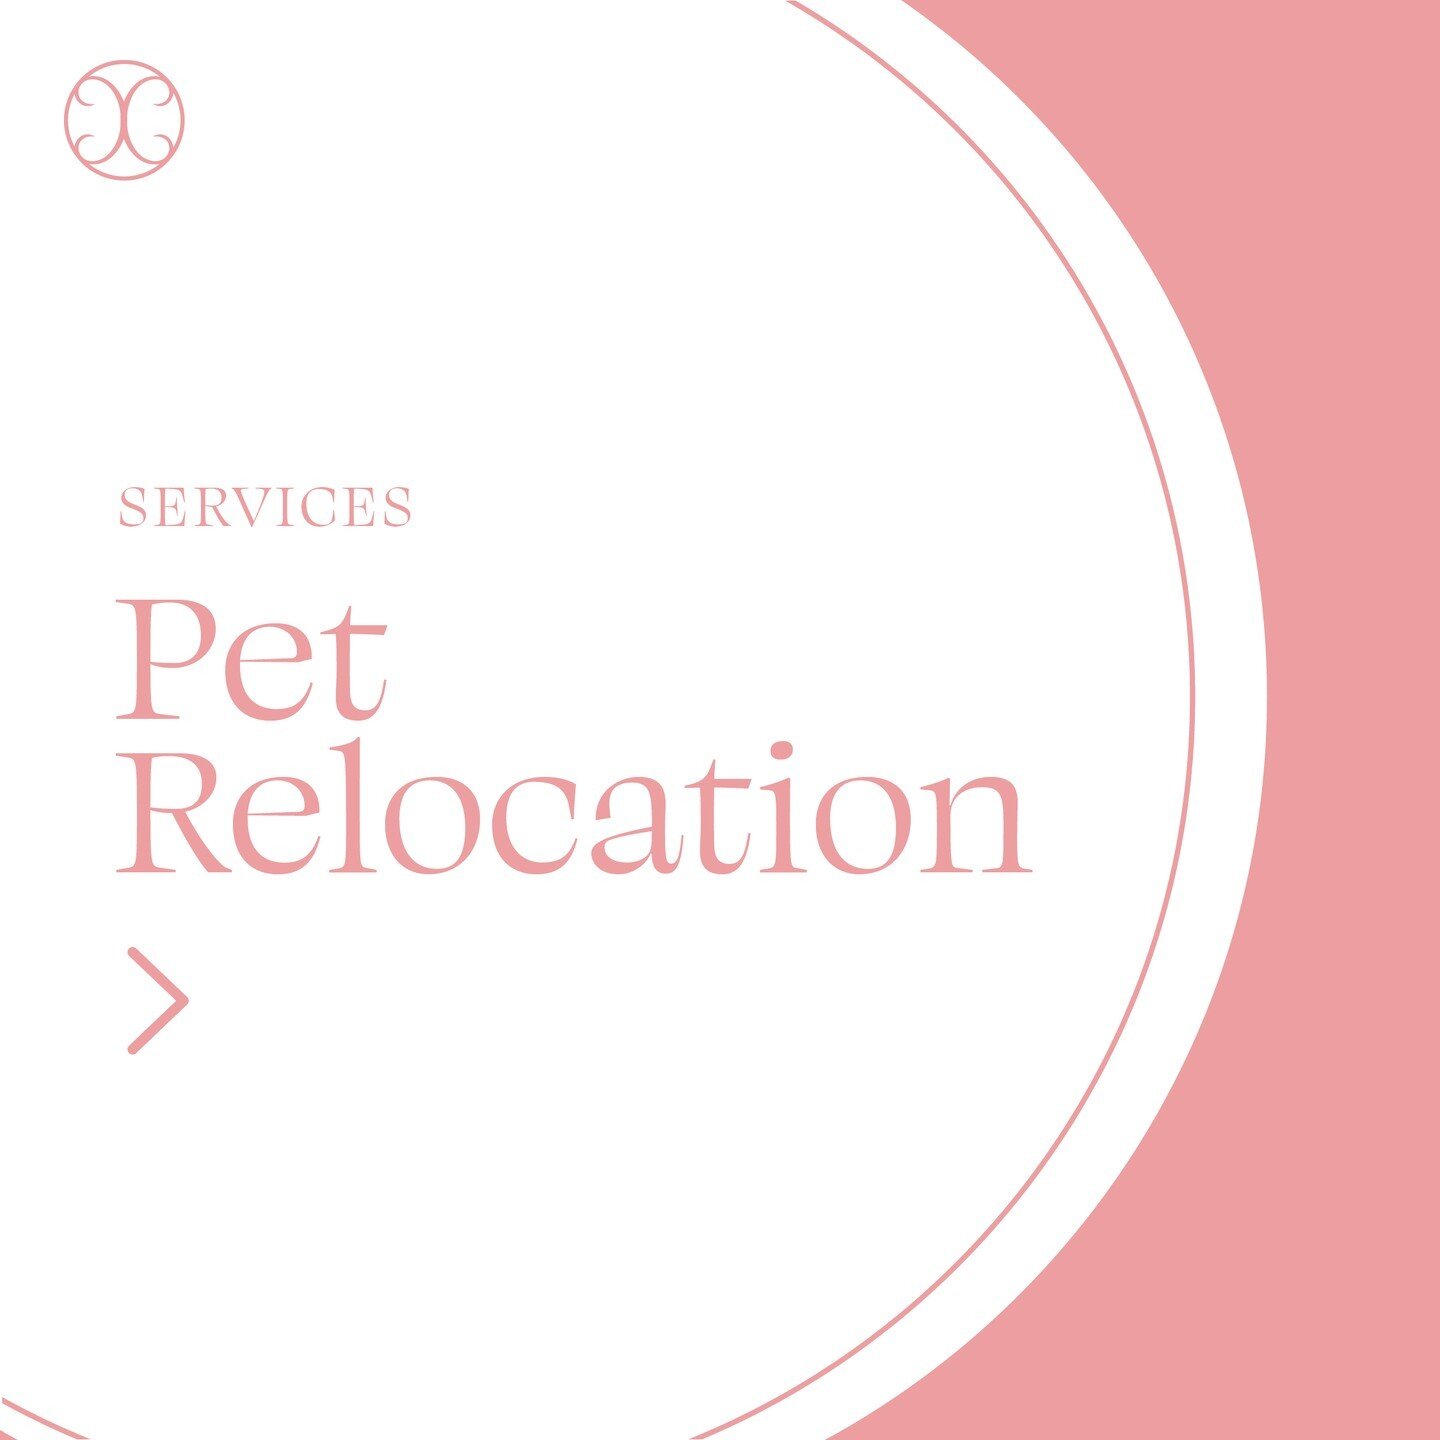 Pet relocation can be stressful, but our team of consultants will provide guidance to make the transition as easy as possible. We strongly recommend spending some time understanding our import laws - we have specific conditions (approved breeds, requ